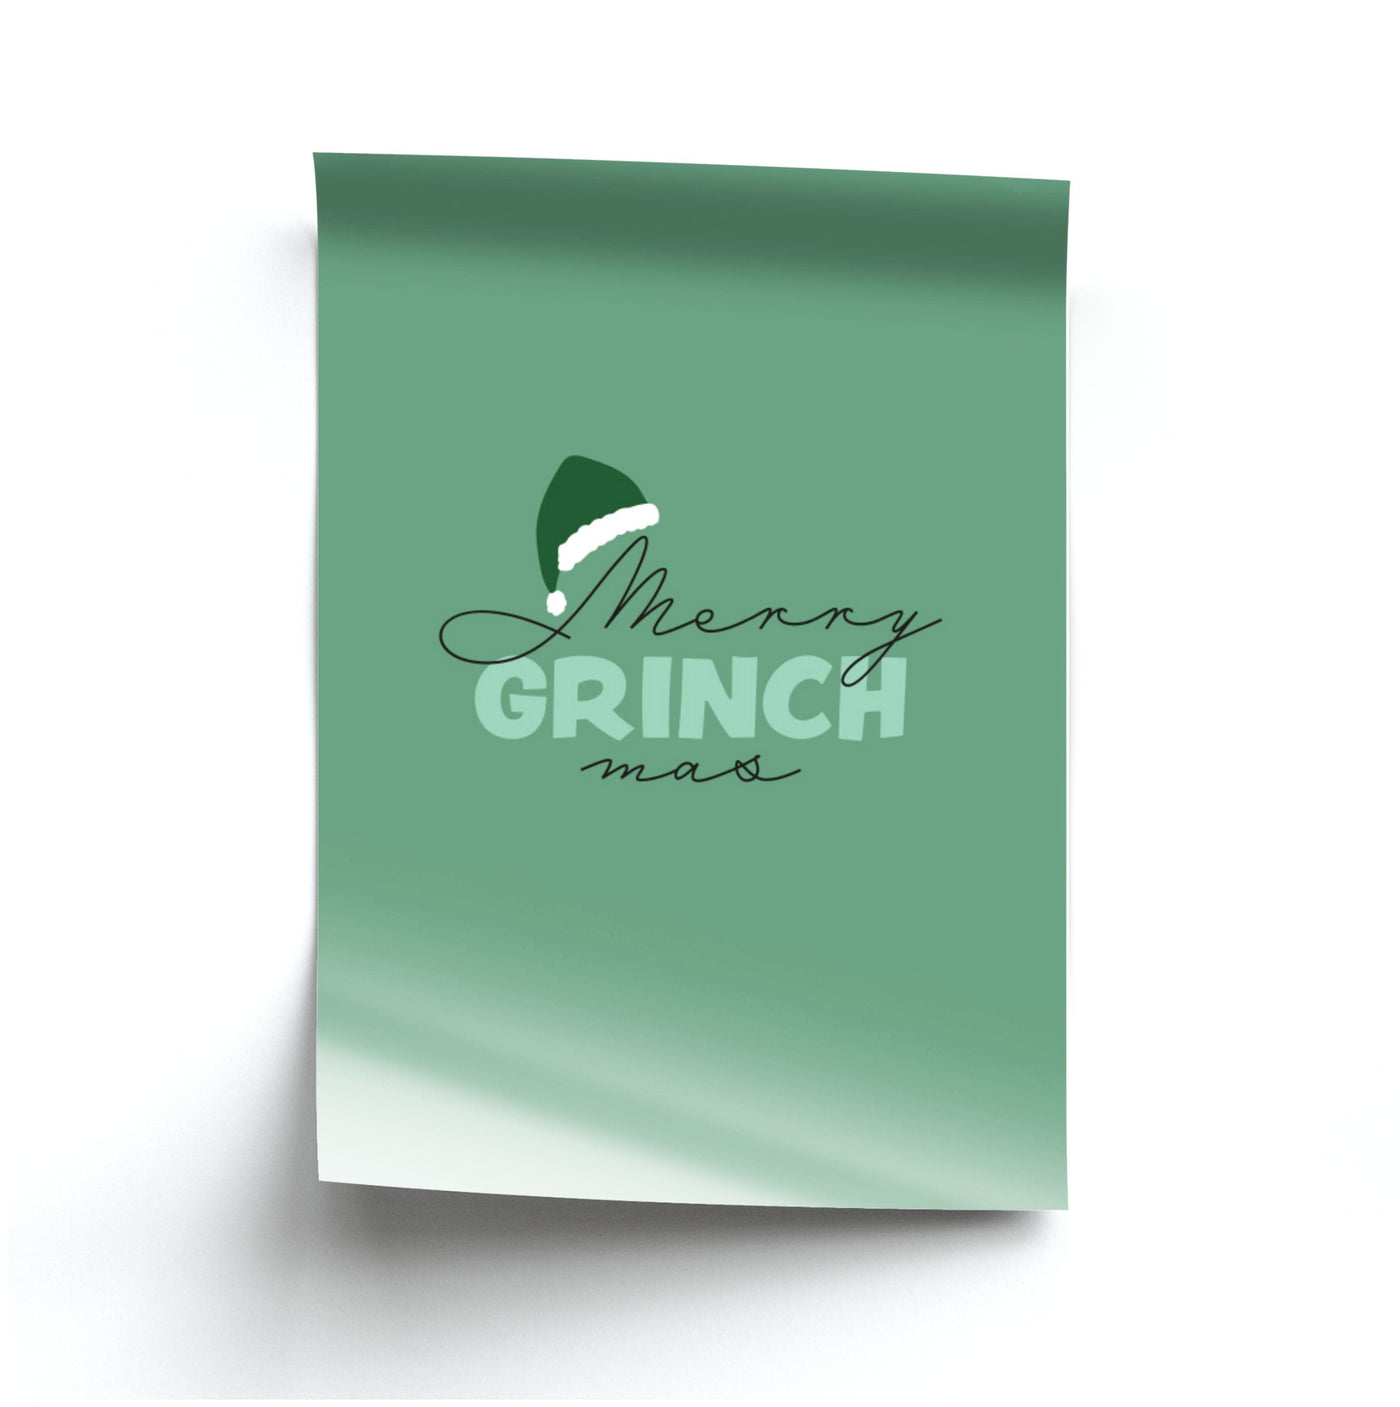 Merry Grinchmas - Grinch Poster